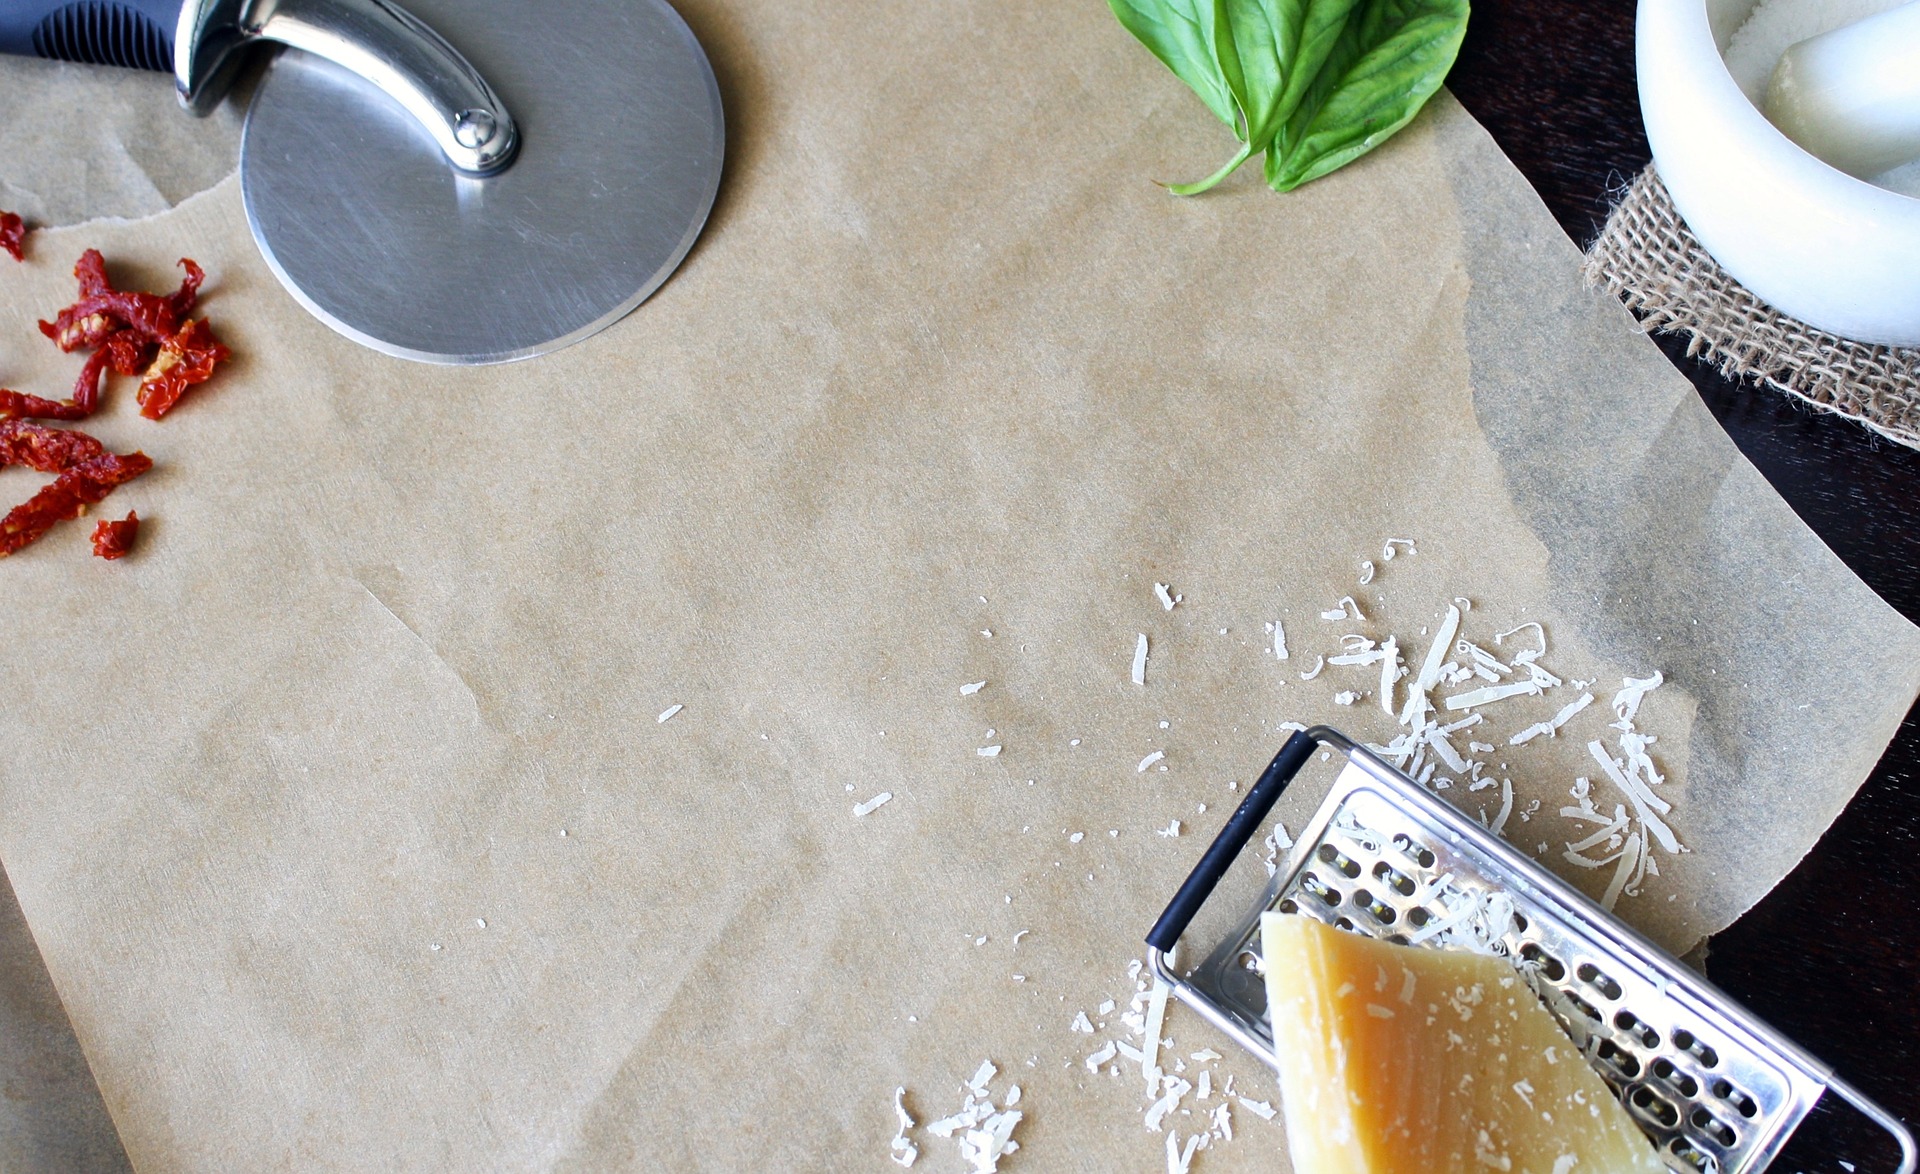 The Difference Between Wax Paper and Parchment Paper